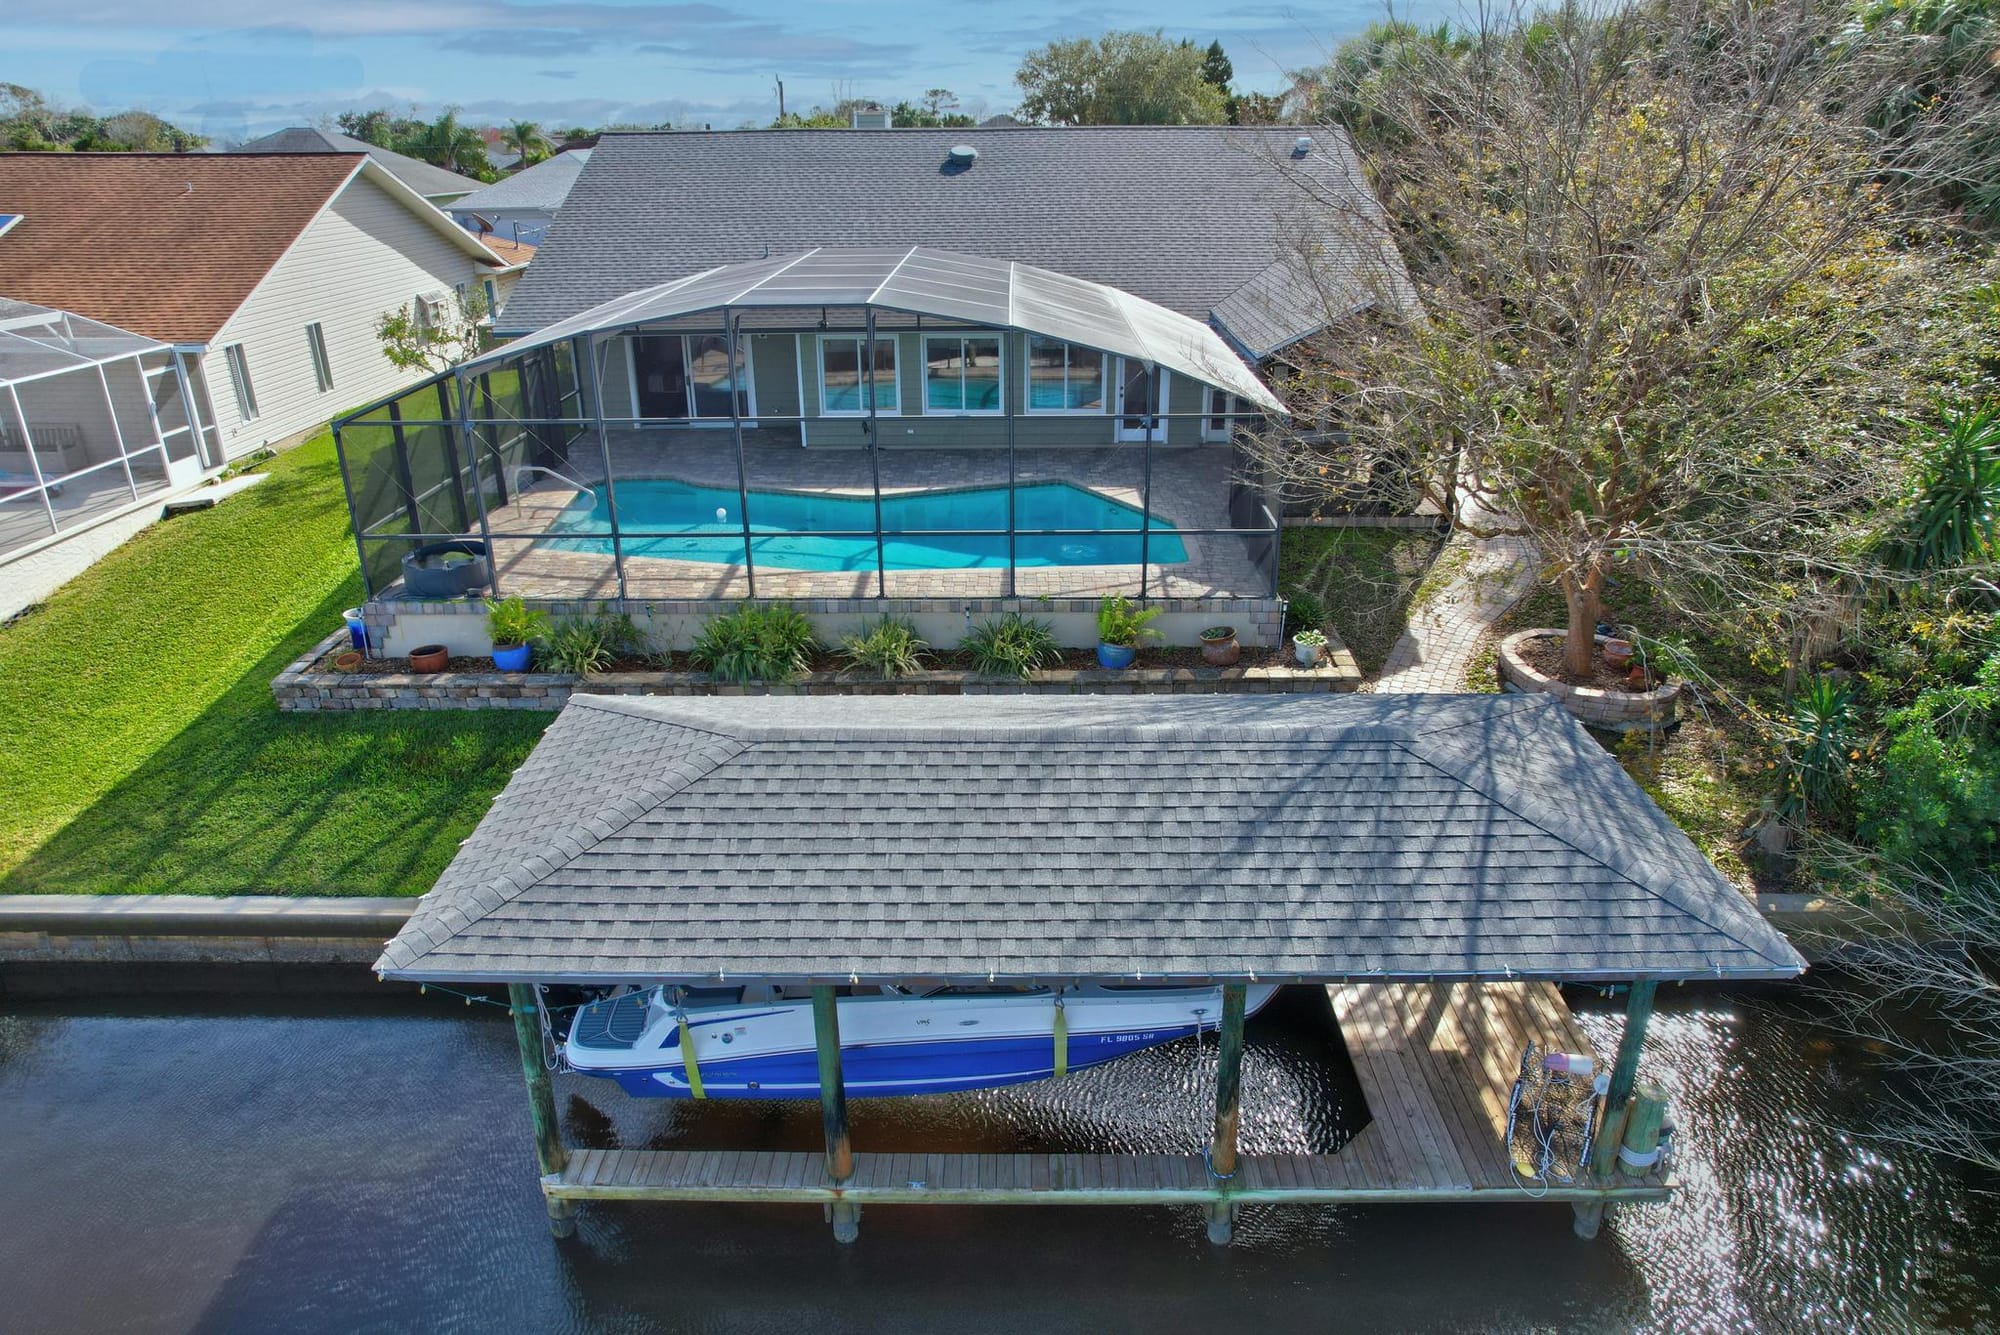 Virtual Open House Feature: Waterfront Paradise - Elegant Family Home in "Sailboat Country"